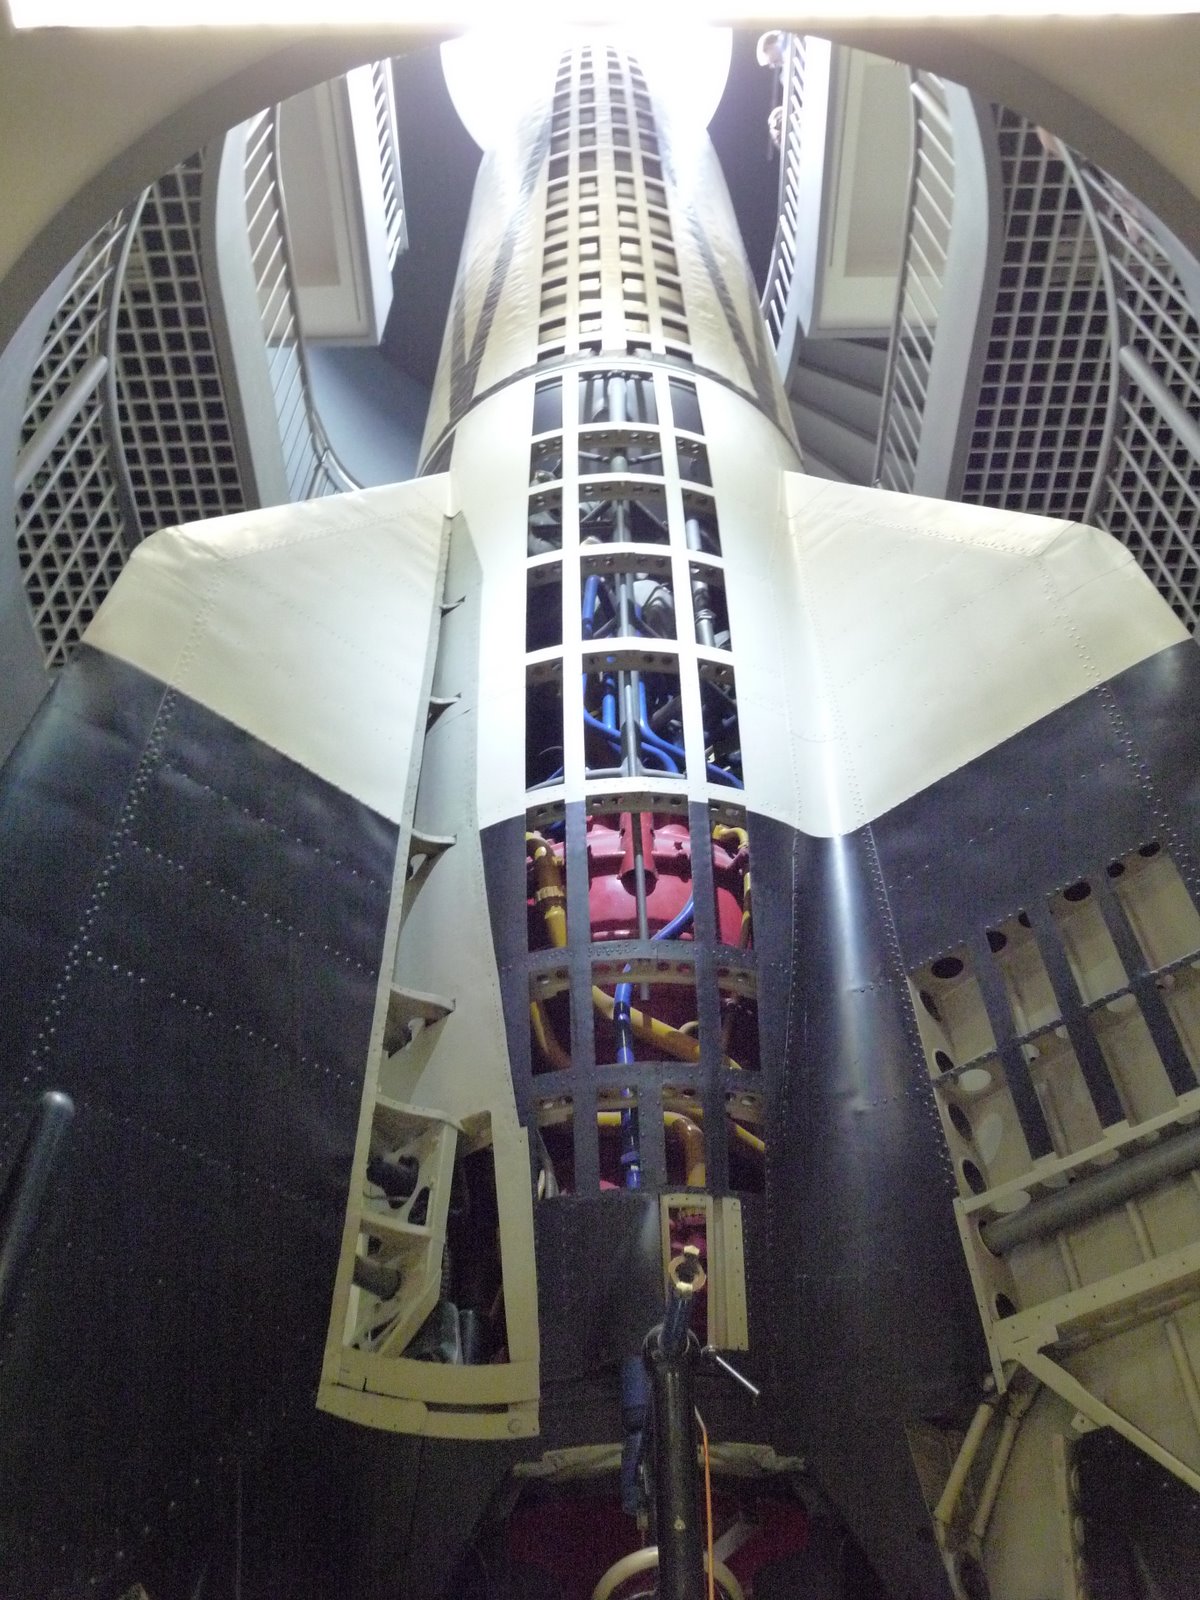 a big space shuttle hanging from the ceiling